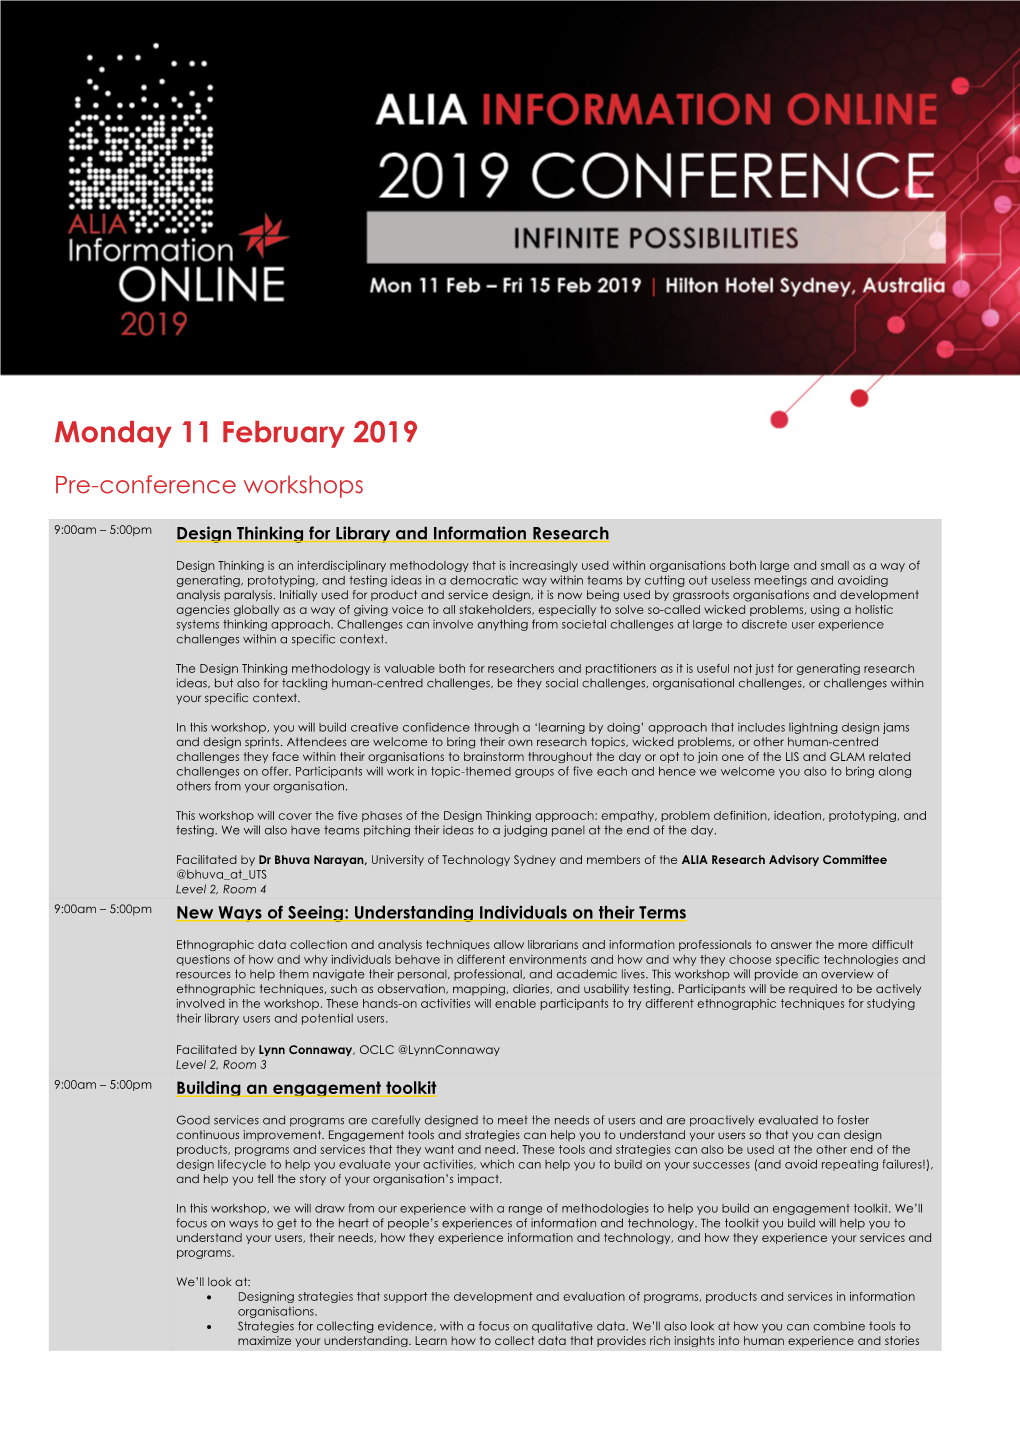 Monday 11 February 2019 Pre-Conference Workshops